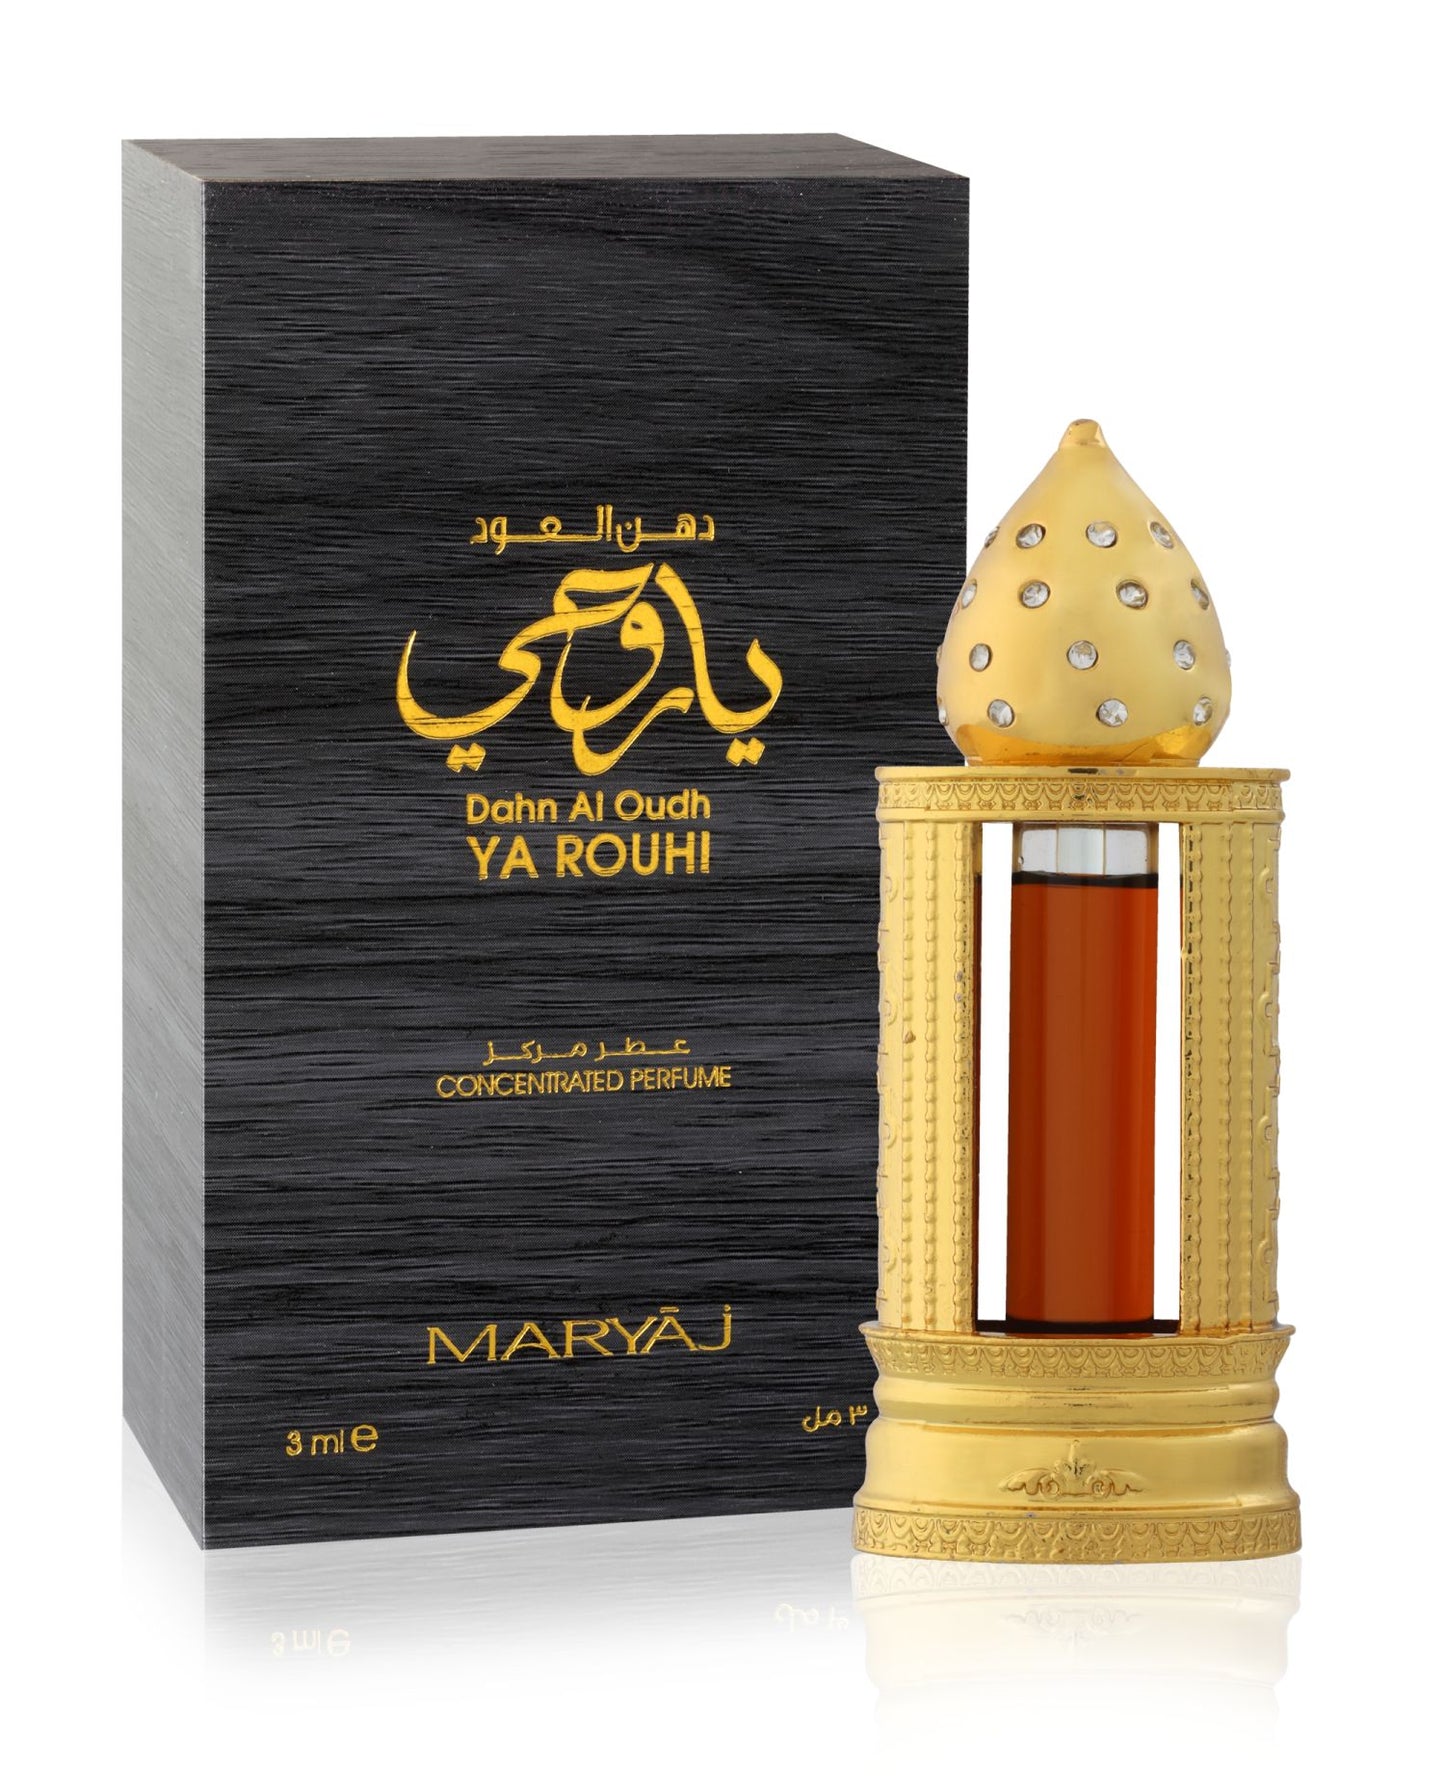 DAHN AL OUD YA ROUHI Concentrated Perfume Oil Combo For Men, 3 ml (Pack of 3)